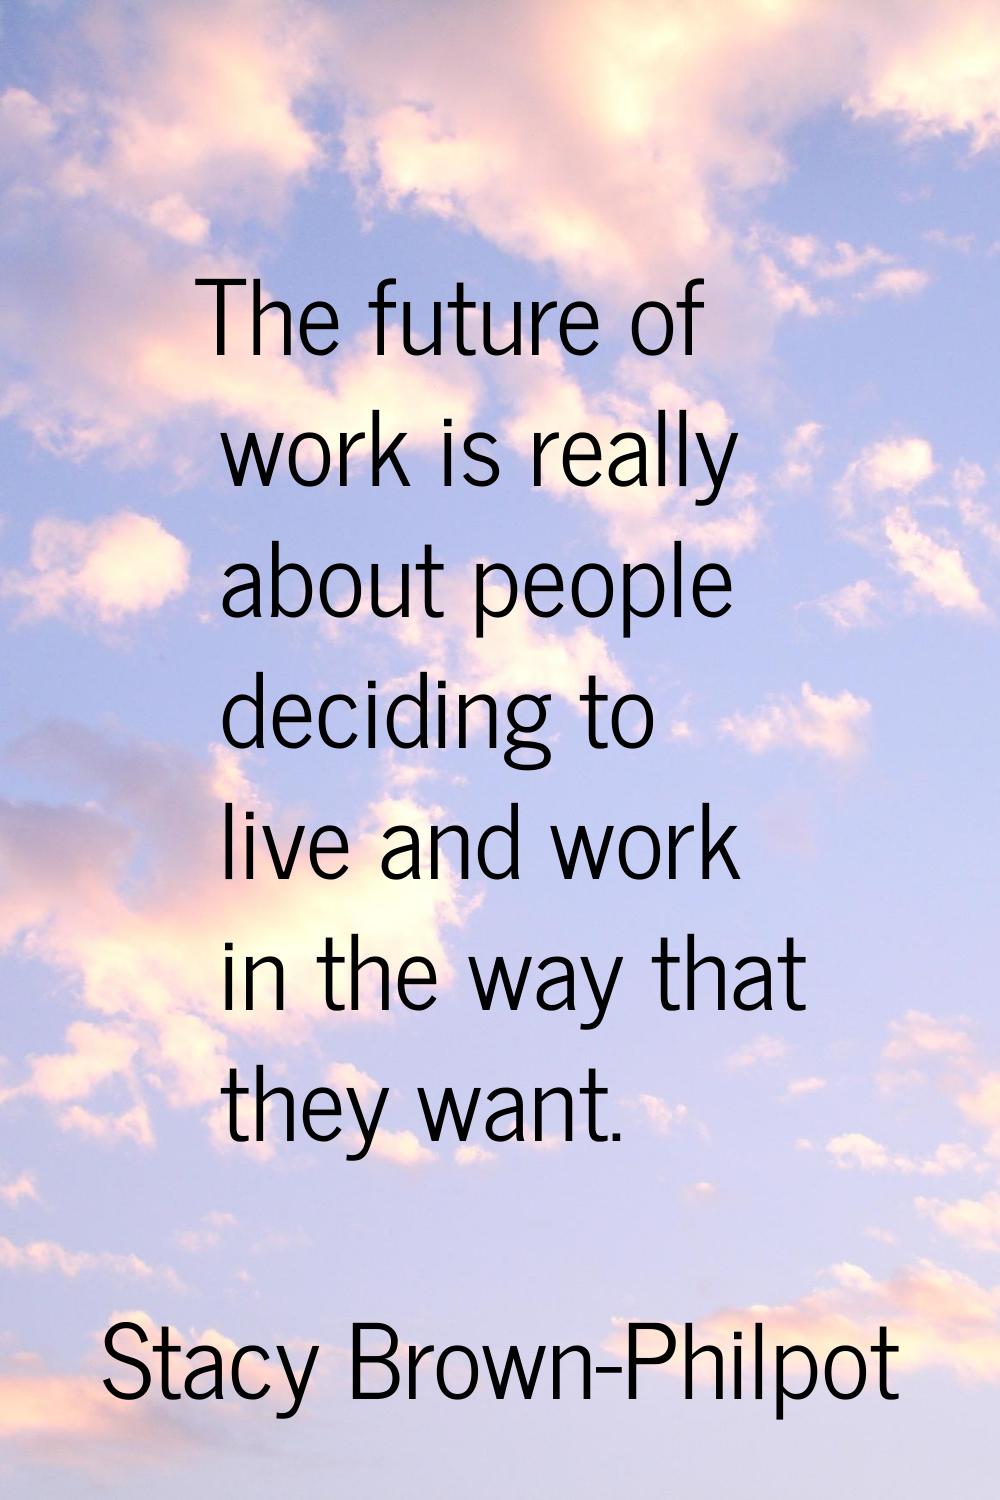 The future of work is really about people deciding to live and work in the way that they want.